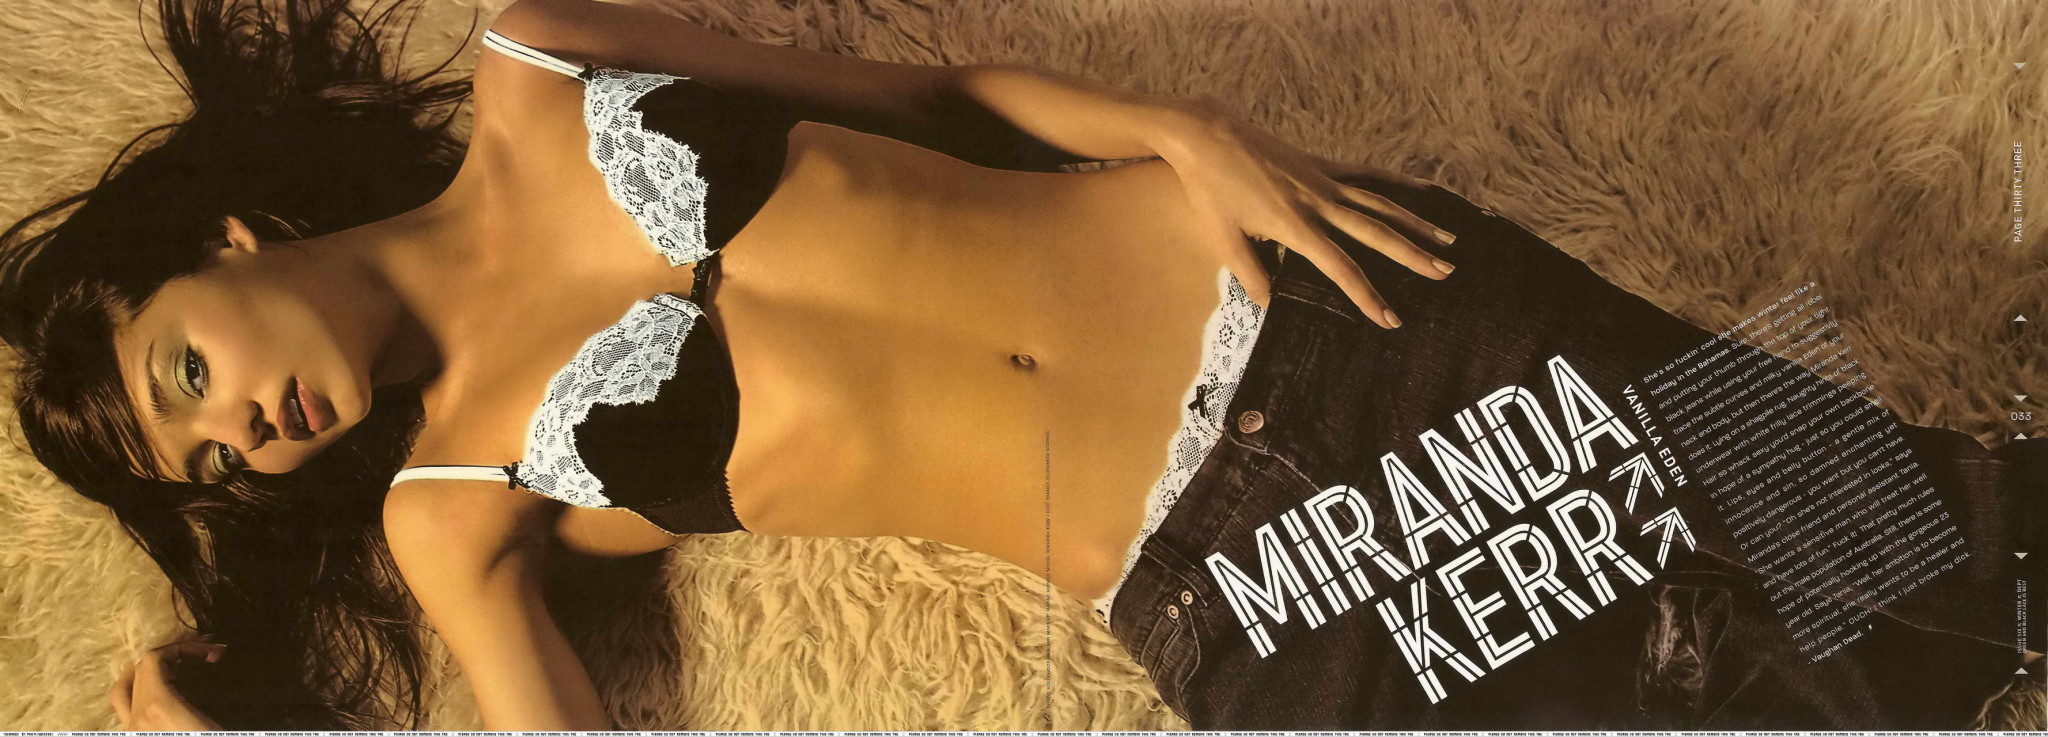 Miranda Kerr showing off her perky little tits in Summer 2010 issue of i-D 'zine #75349586